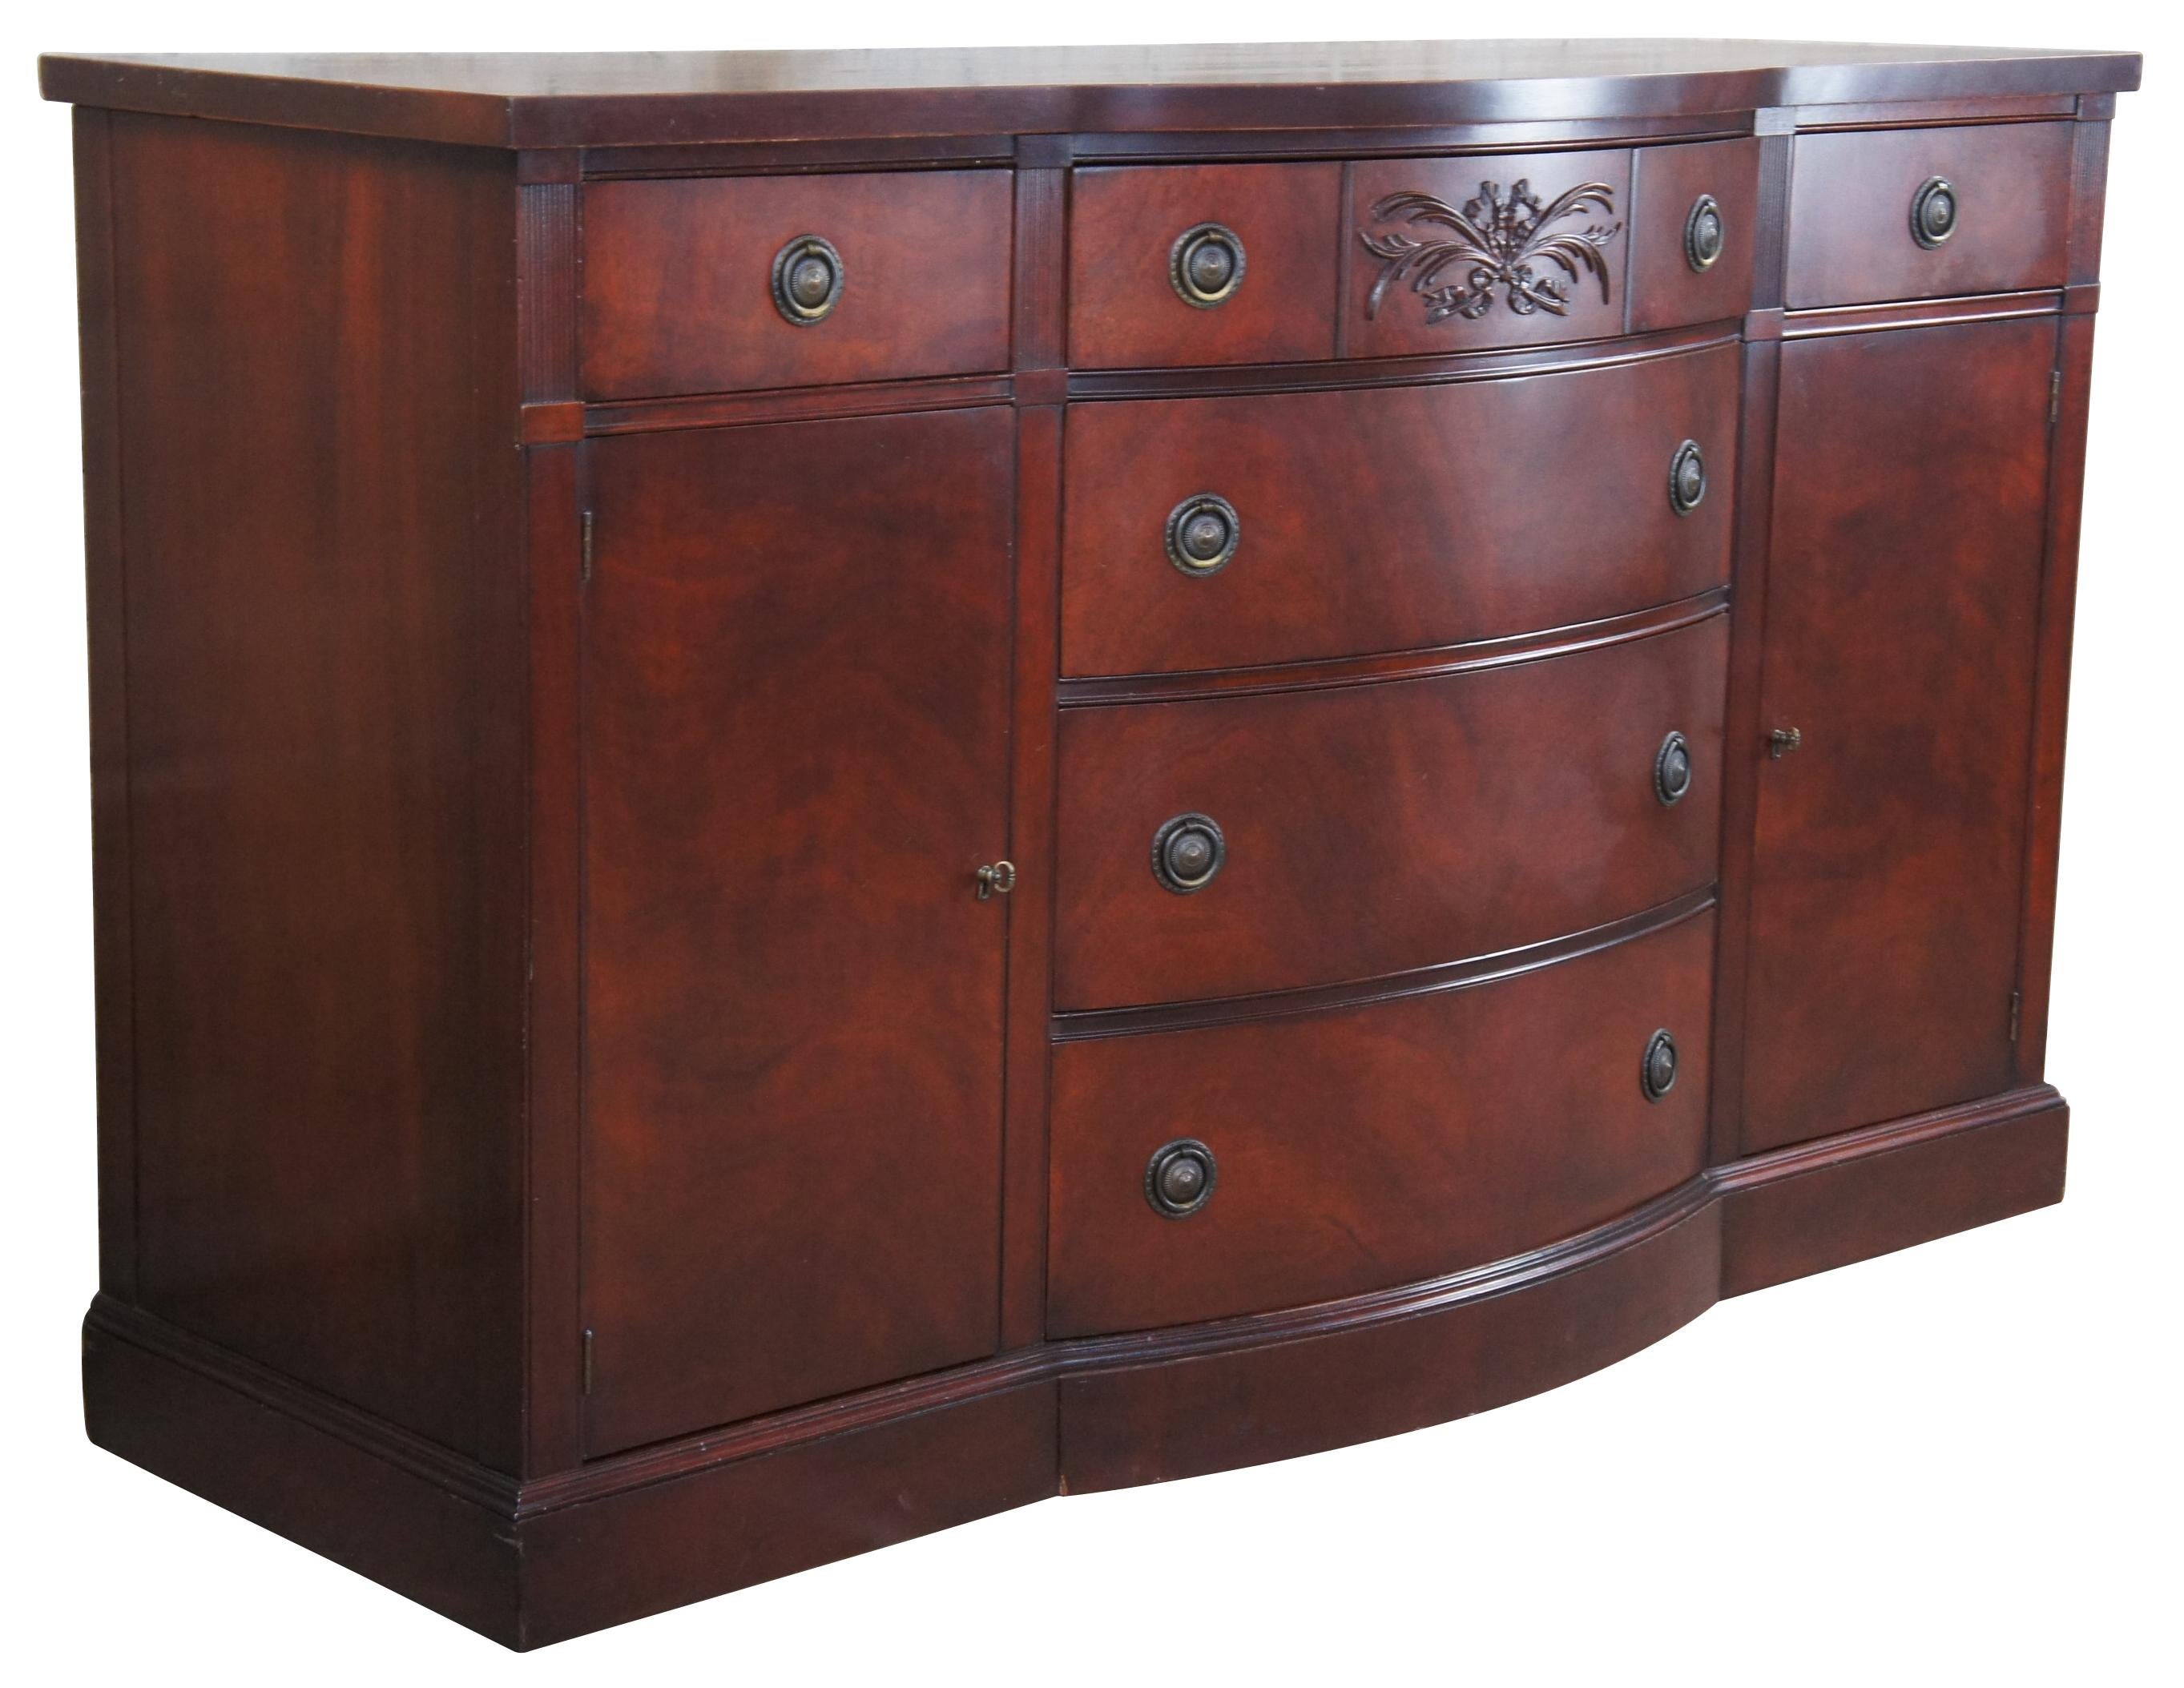 Vintage Drexel Duncan Phyfe Style bowfront server, circa 1940s. Made of genuine mahogany featuring six dovetailed drawers flanked by outer cupboard storage. Upper central drawer has a neoclassical carved design. Outer drawer drawers include dividers